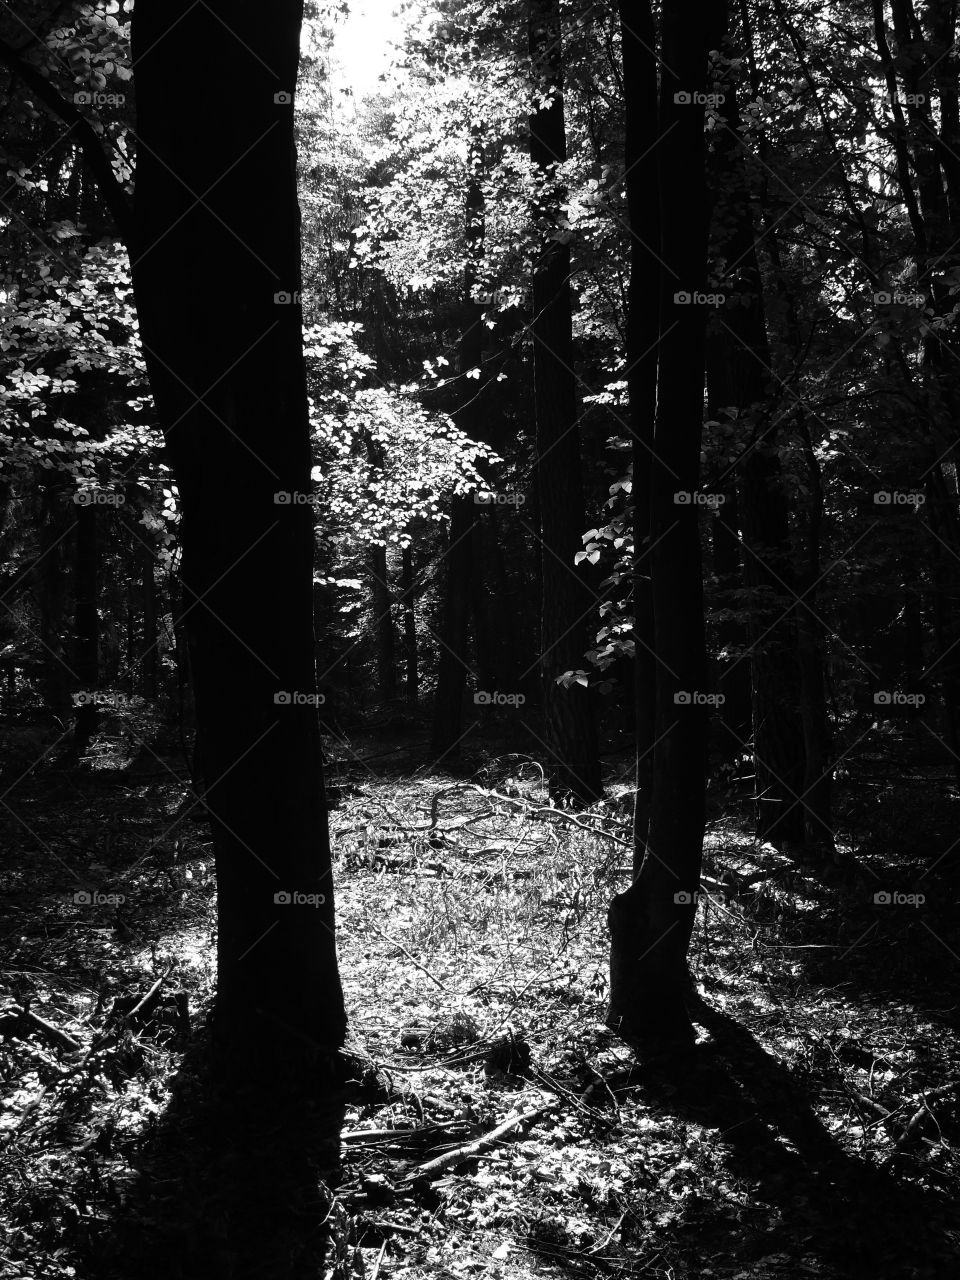 Black and white shot of trees in forest in Bernau bei Berlin, Germany.